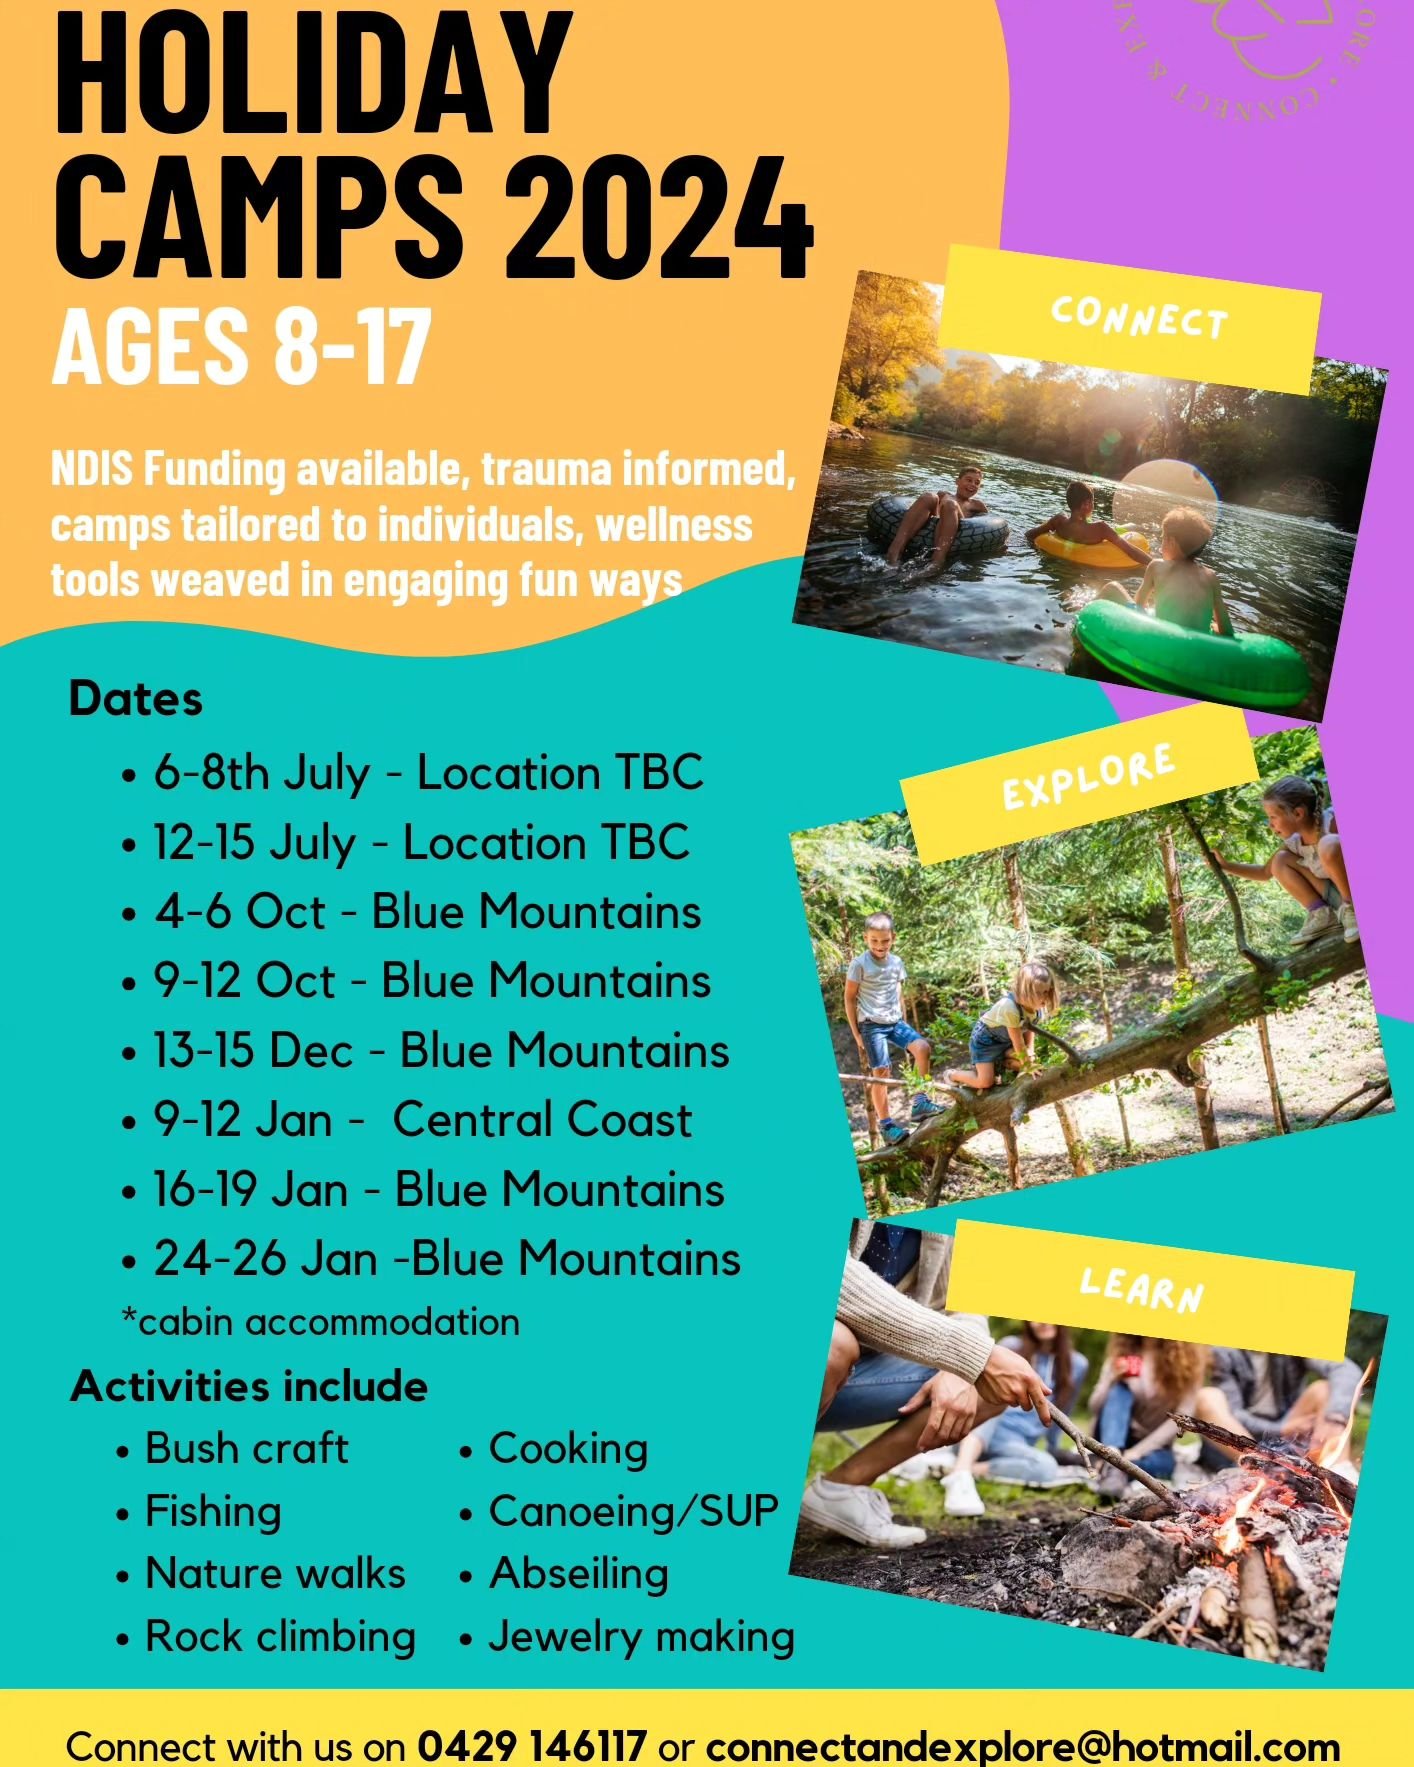 Wooohoo, next camp dates have touched down. Reach out to save your spots. I'm super stoked and excited planning the next adventures. 

Camps are 
✨️fun 
✨️small groups to make friends easily
✨️nature based
✨️tailored to each individual
✨️can provide 